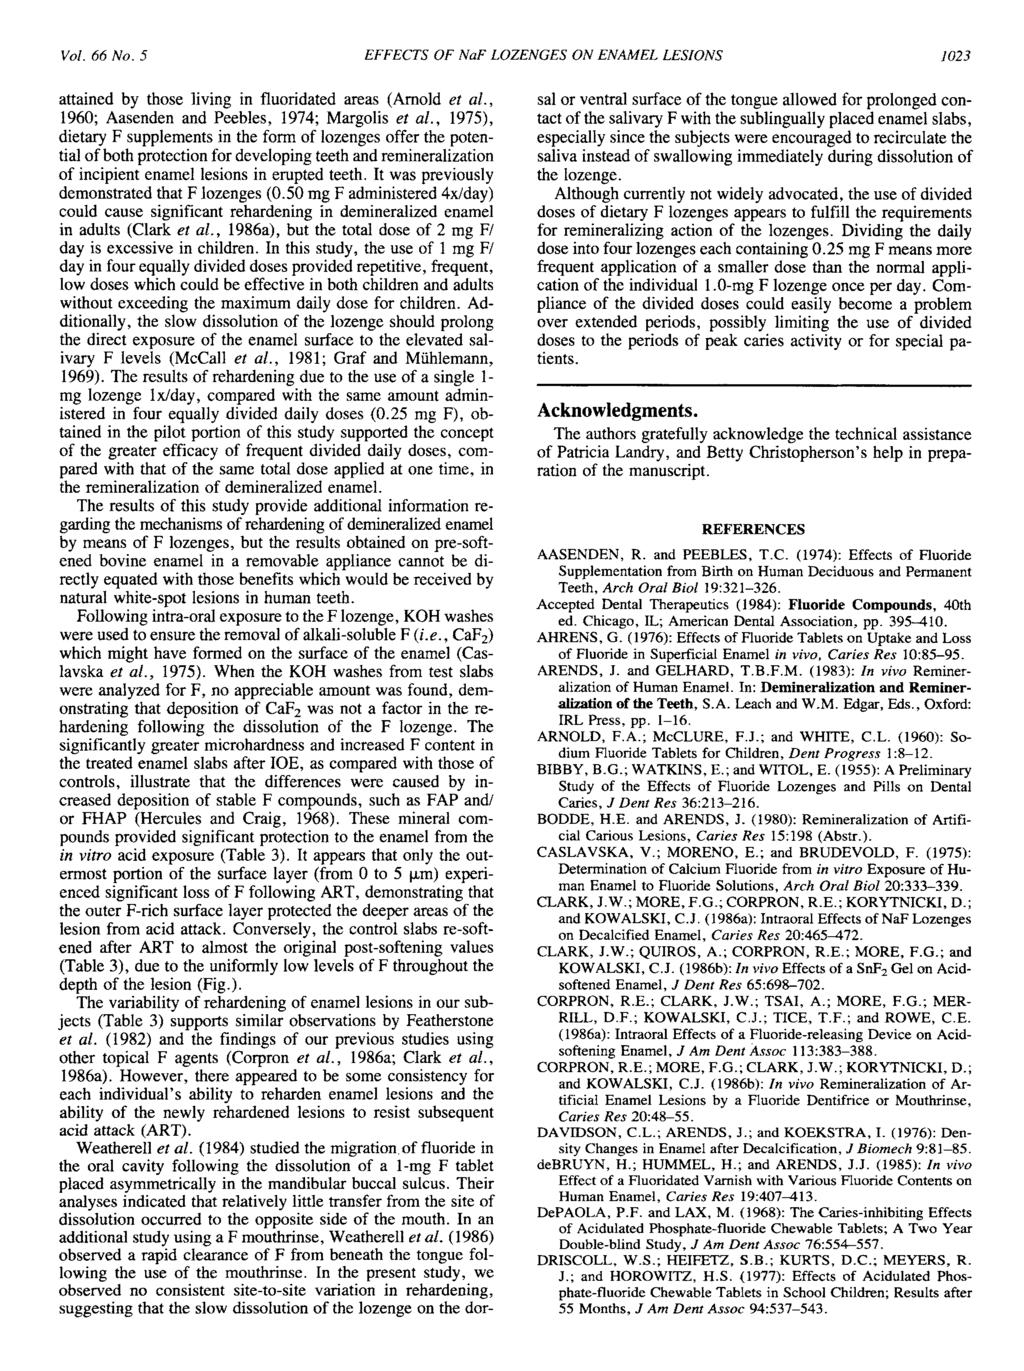 Vol. 66 No. 5 EFFECTS OF NaF LOZENGES ON ENAMEL LESIONS 1023 attained by those living in fluoridated areas (Arnold et al., 1960; Aasenden and Peebles, 1974; Margolis et al.